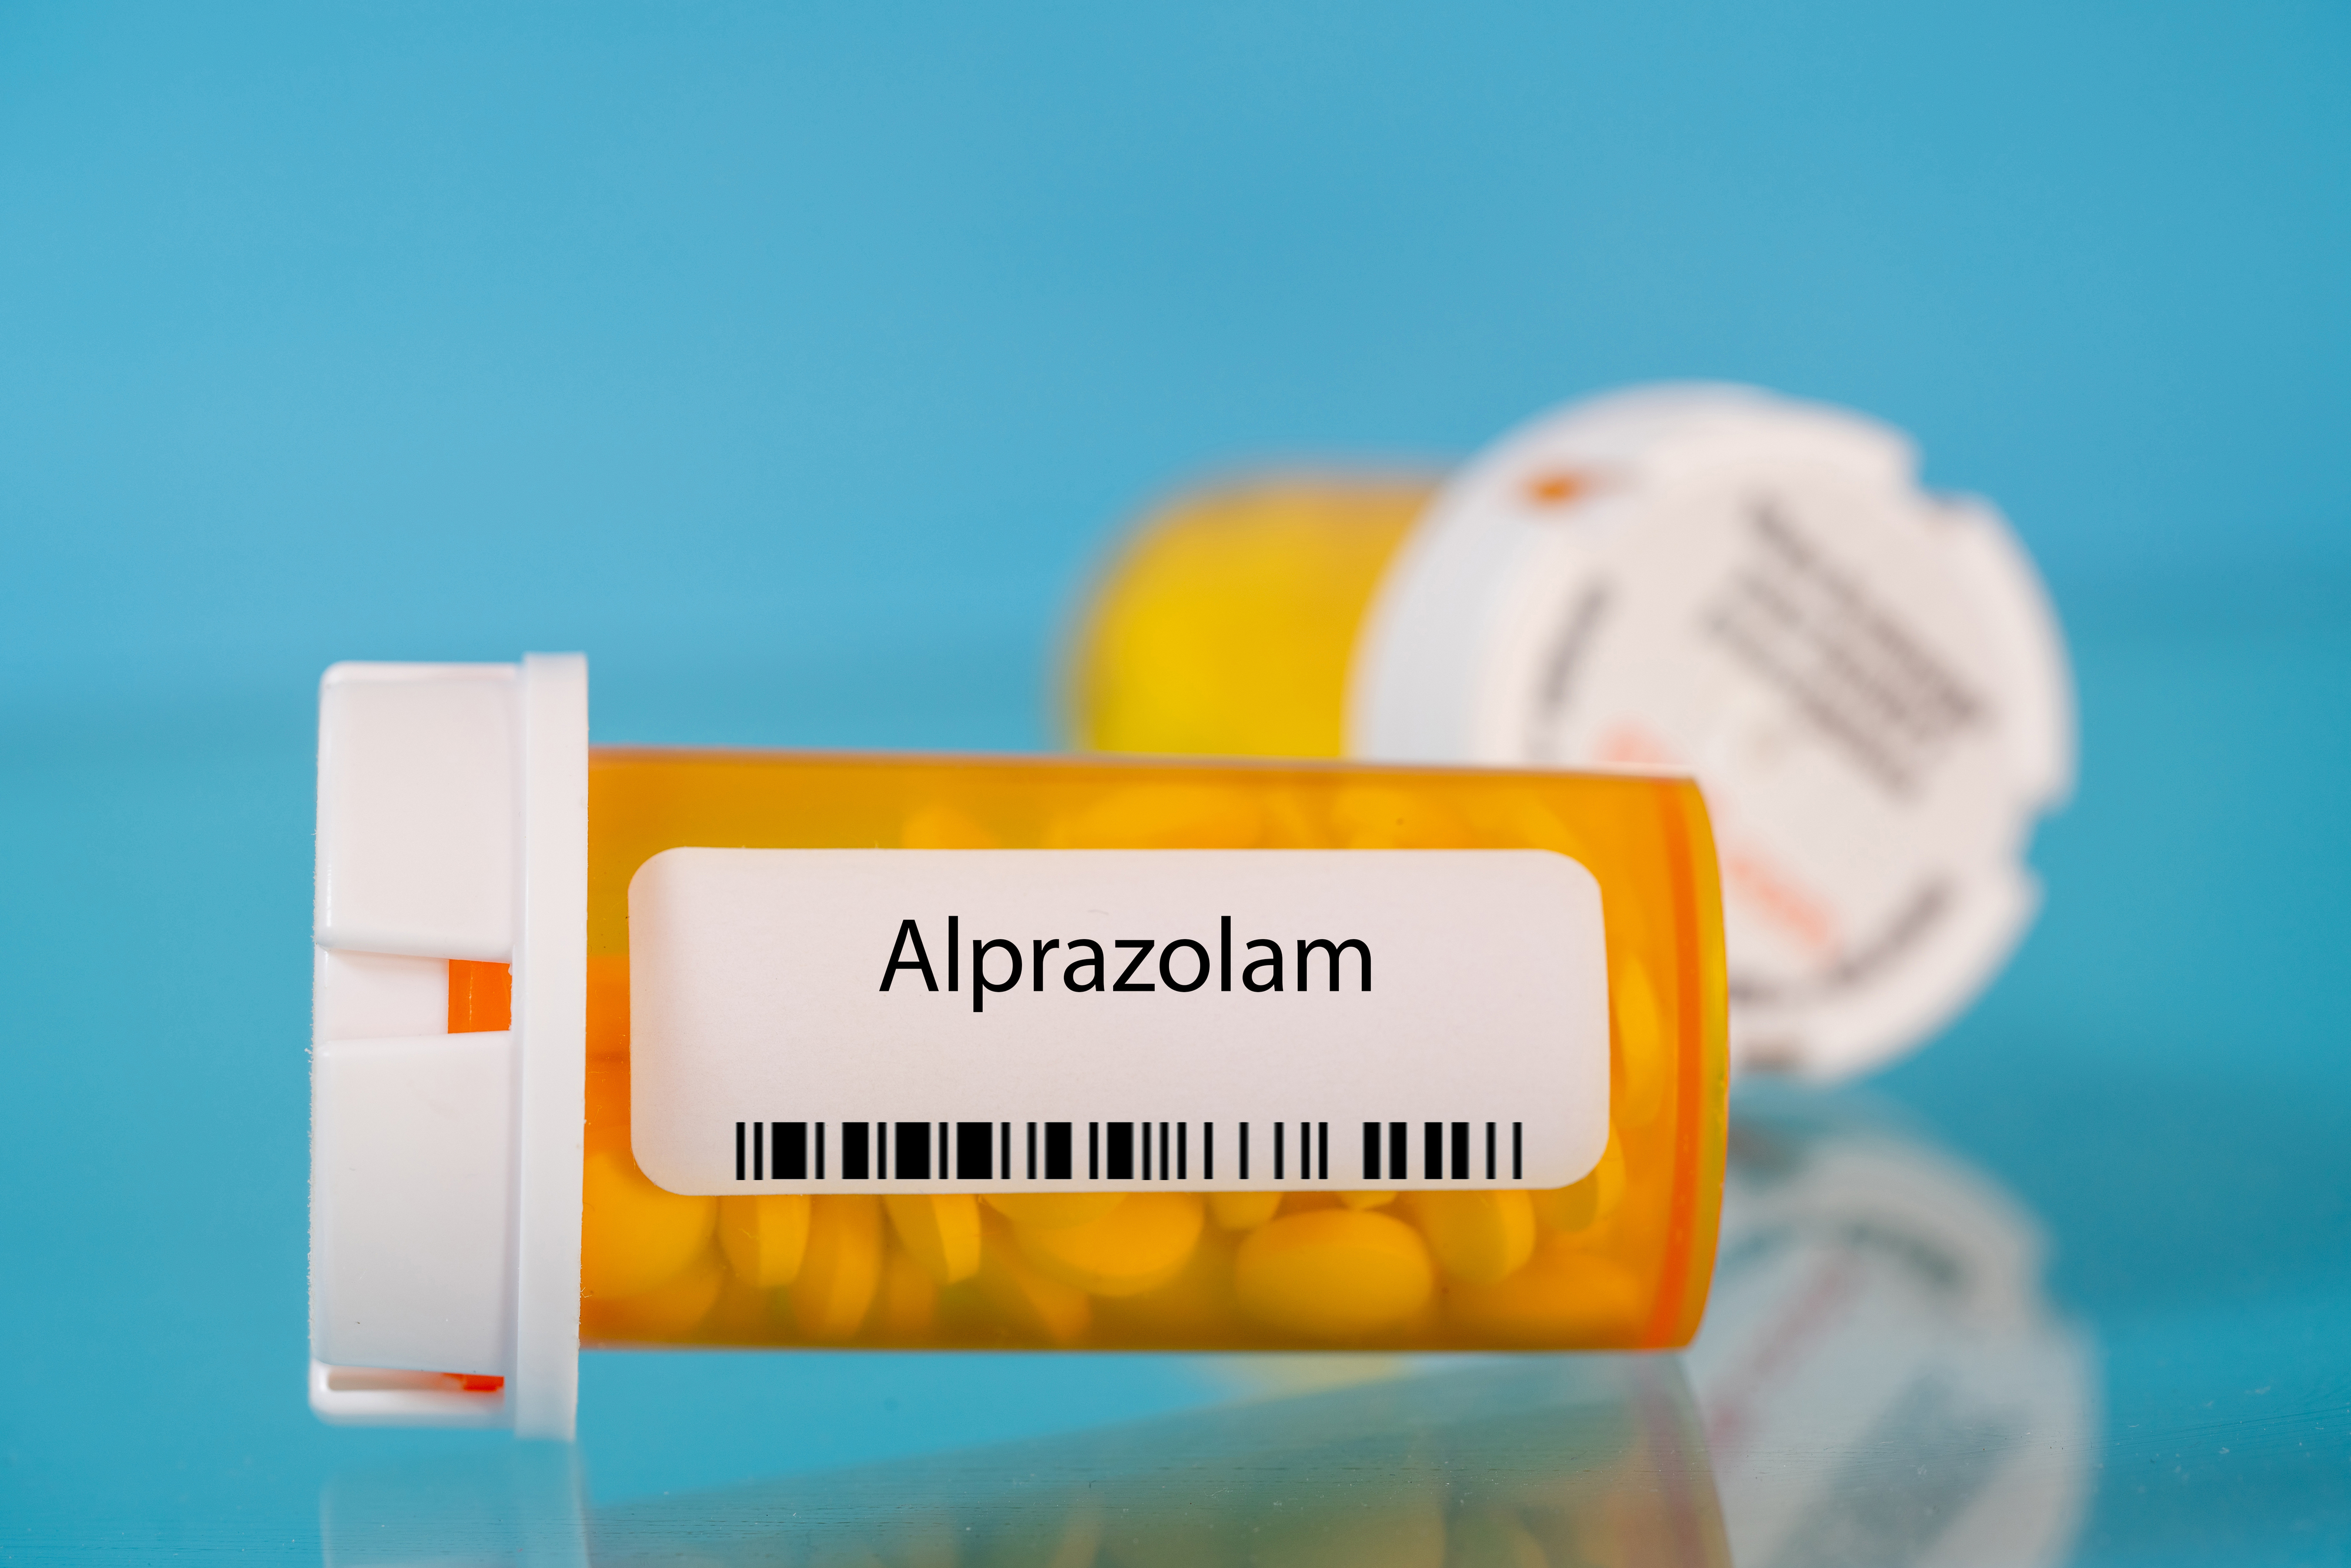 Prescription bottle labeled Alprazolam with pills, focused foreground on blue surface